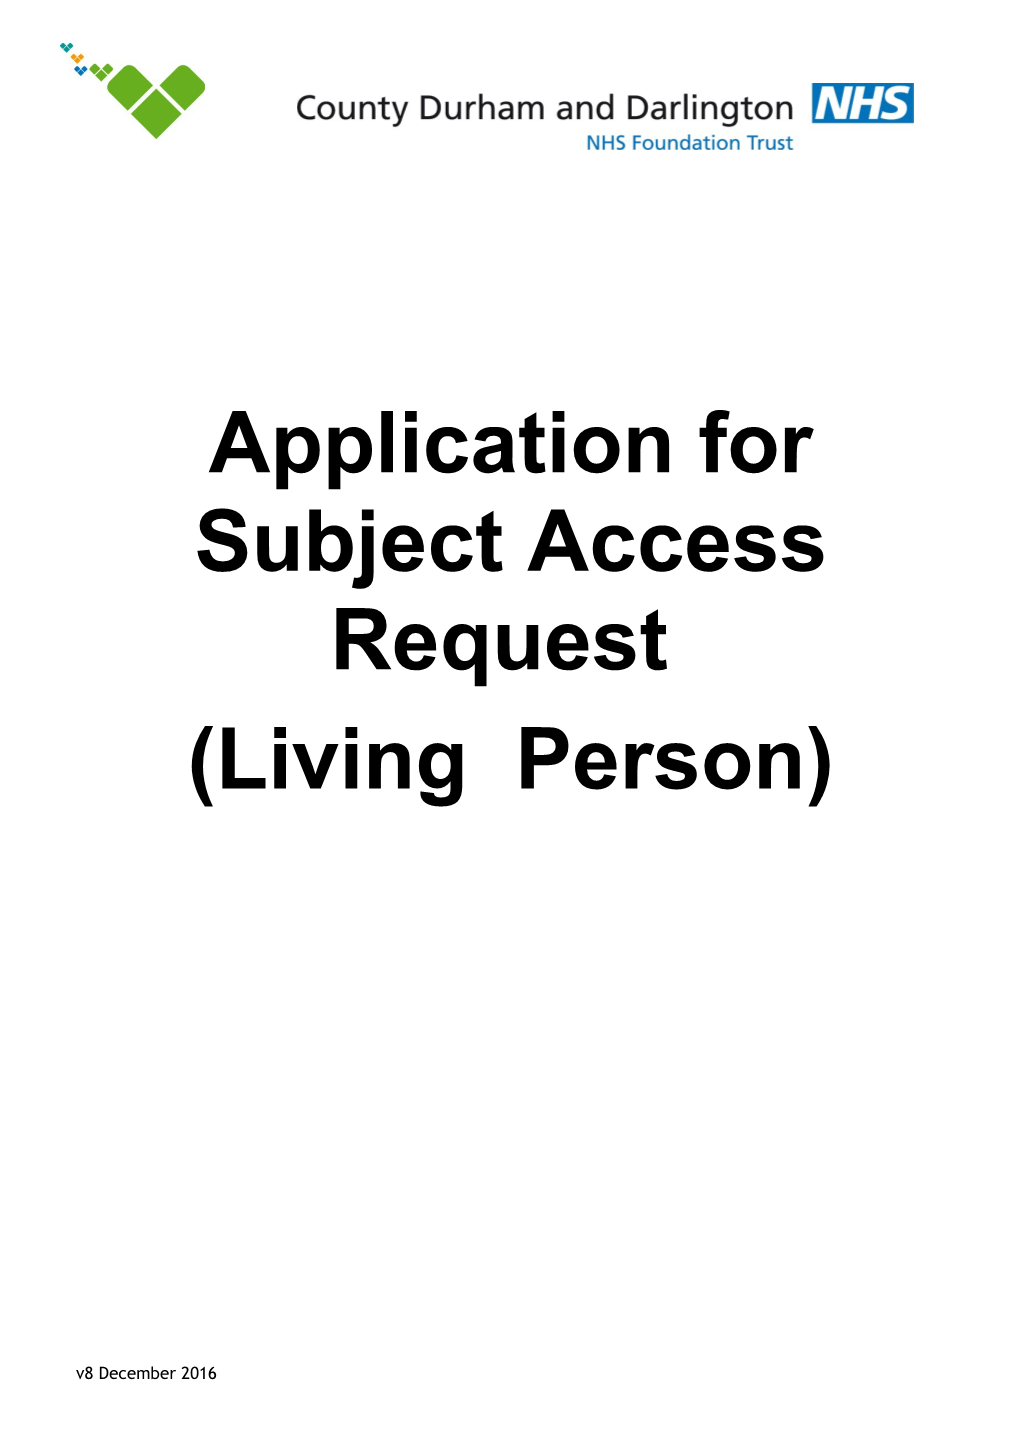 Application for Subject Access Request